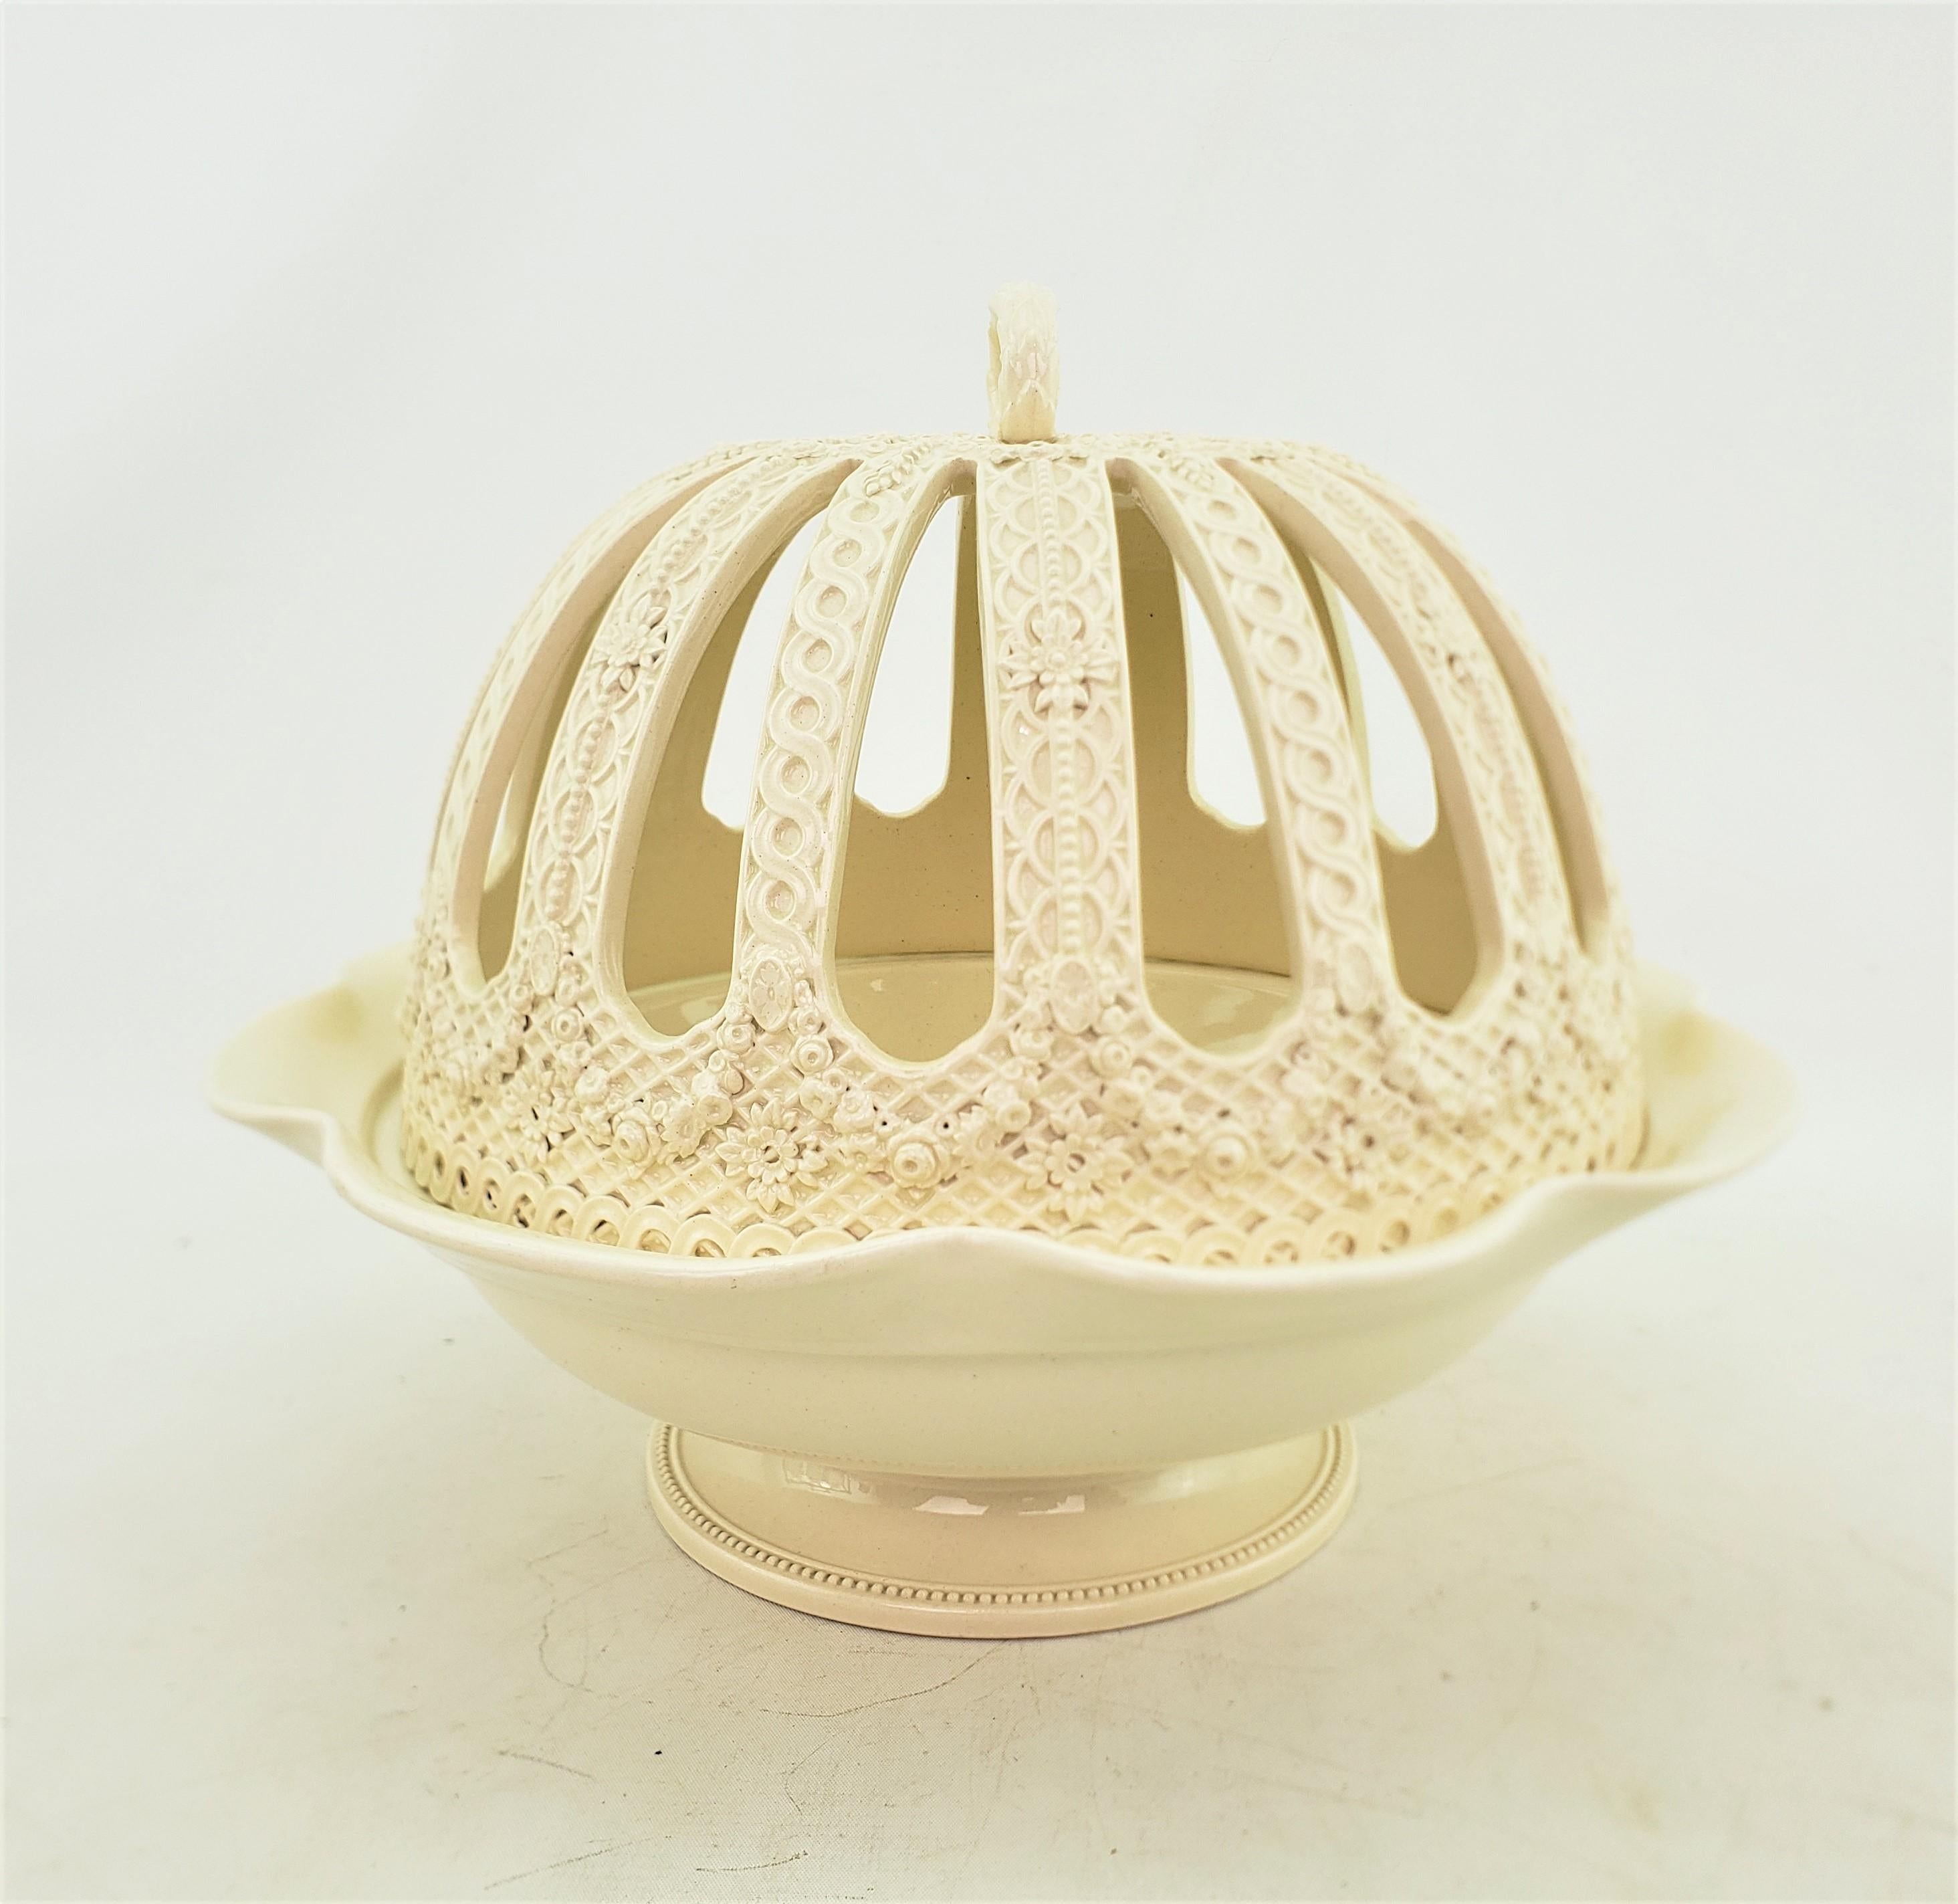 20th Century Antique Wedgwood Creamware or Queen's Ware Covered Orange Bowl For Sale